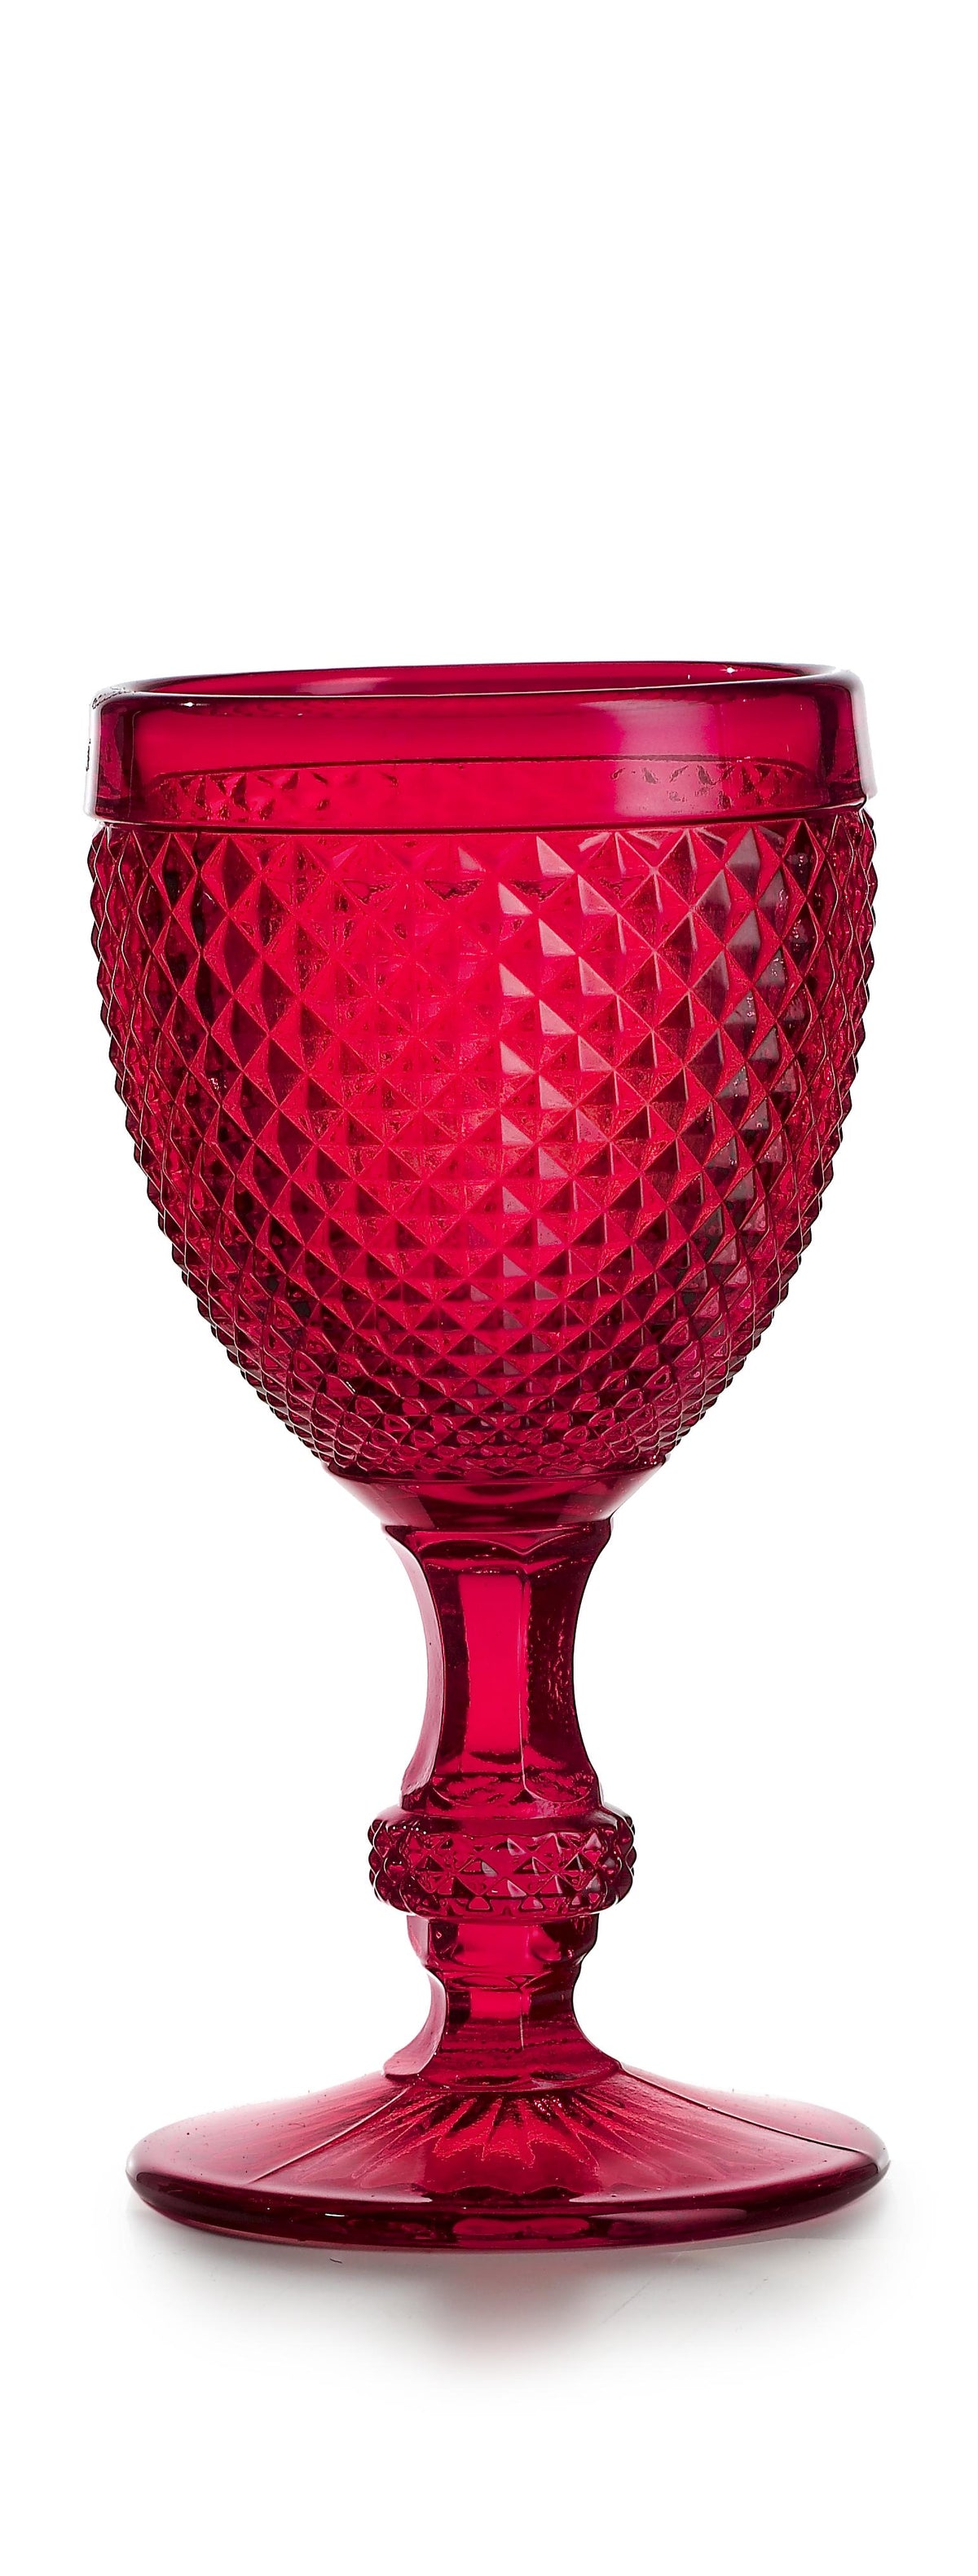 Bicos Red Wine Goblets in Red, Set of 4